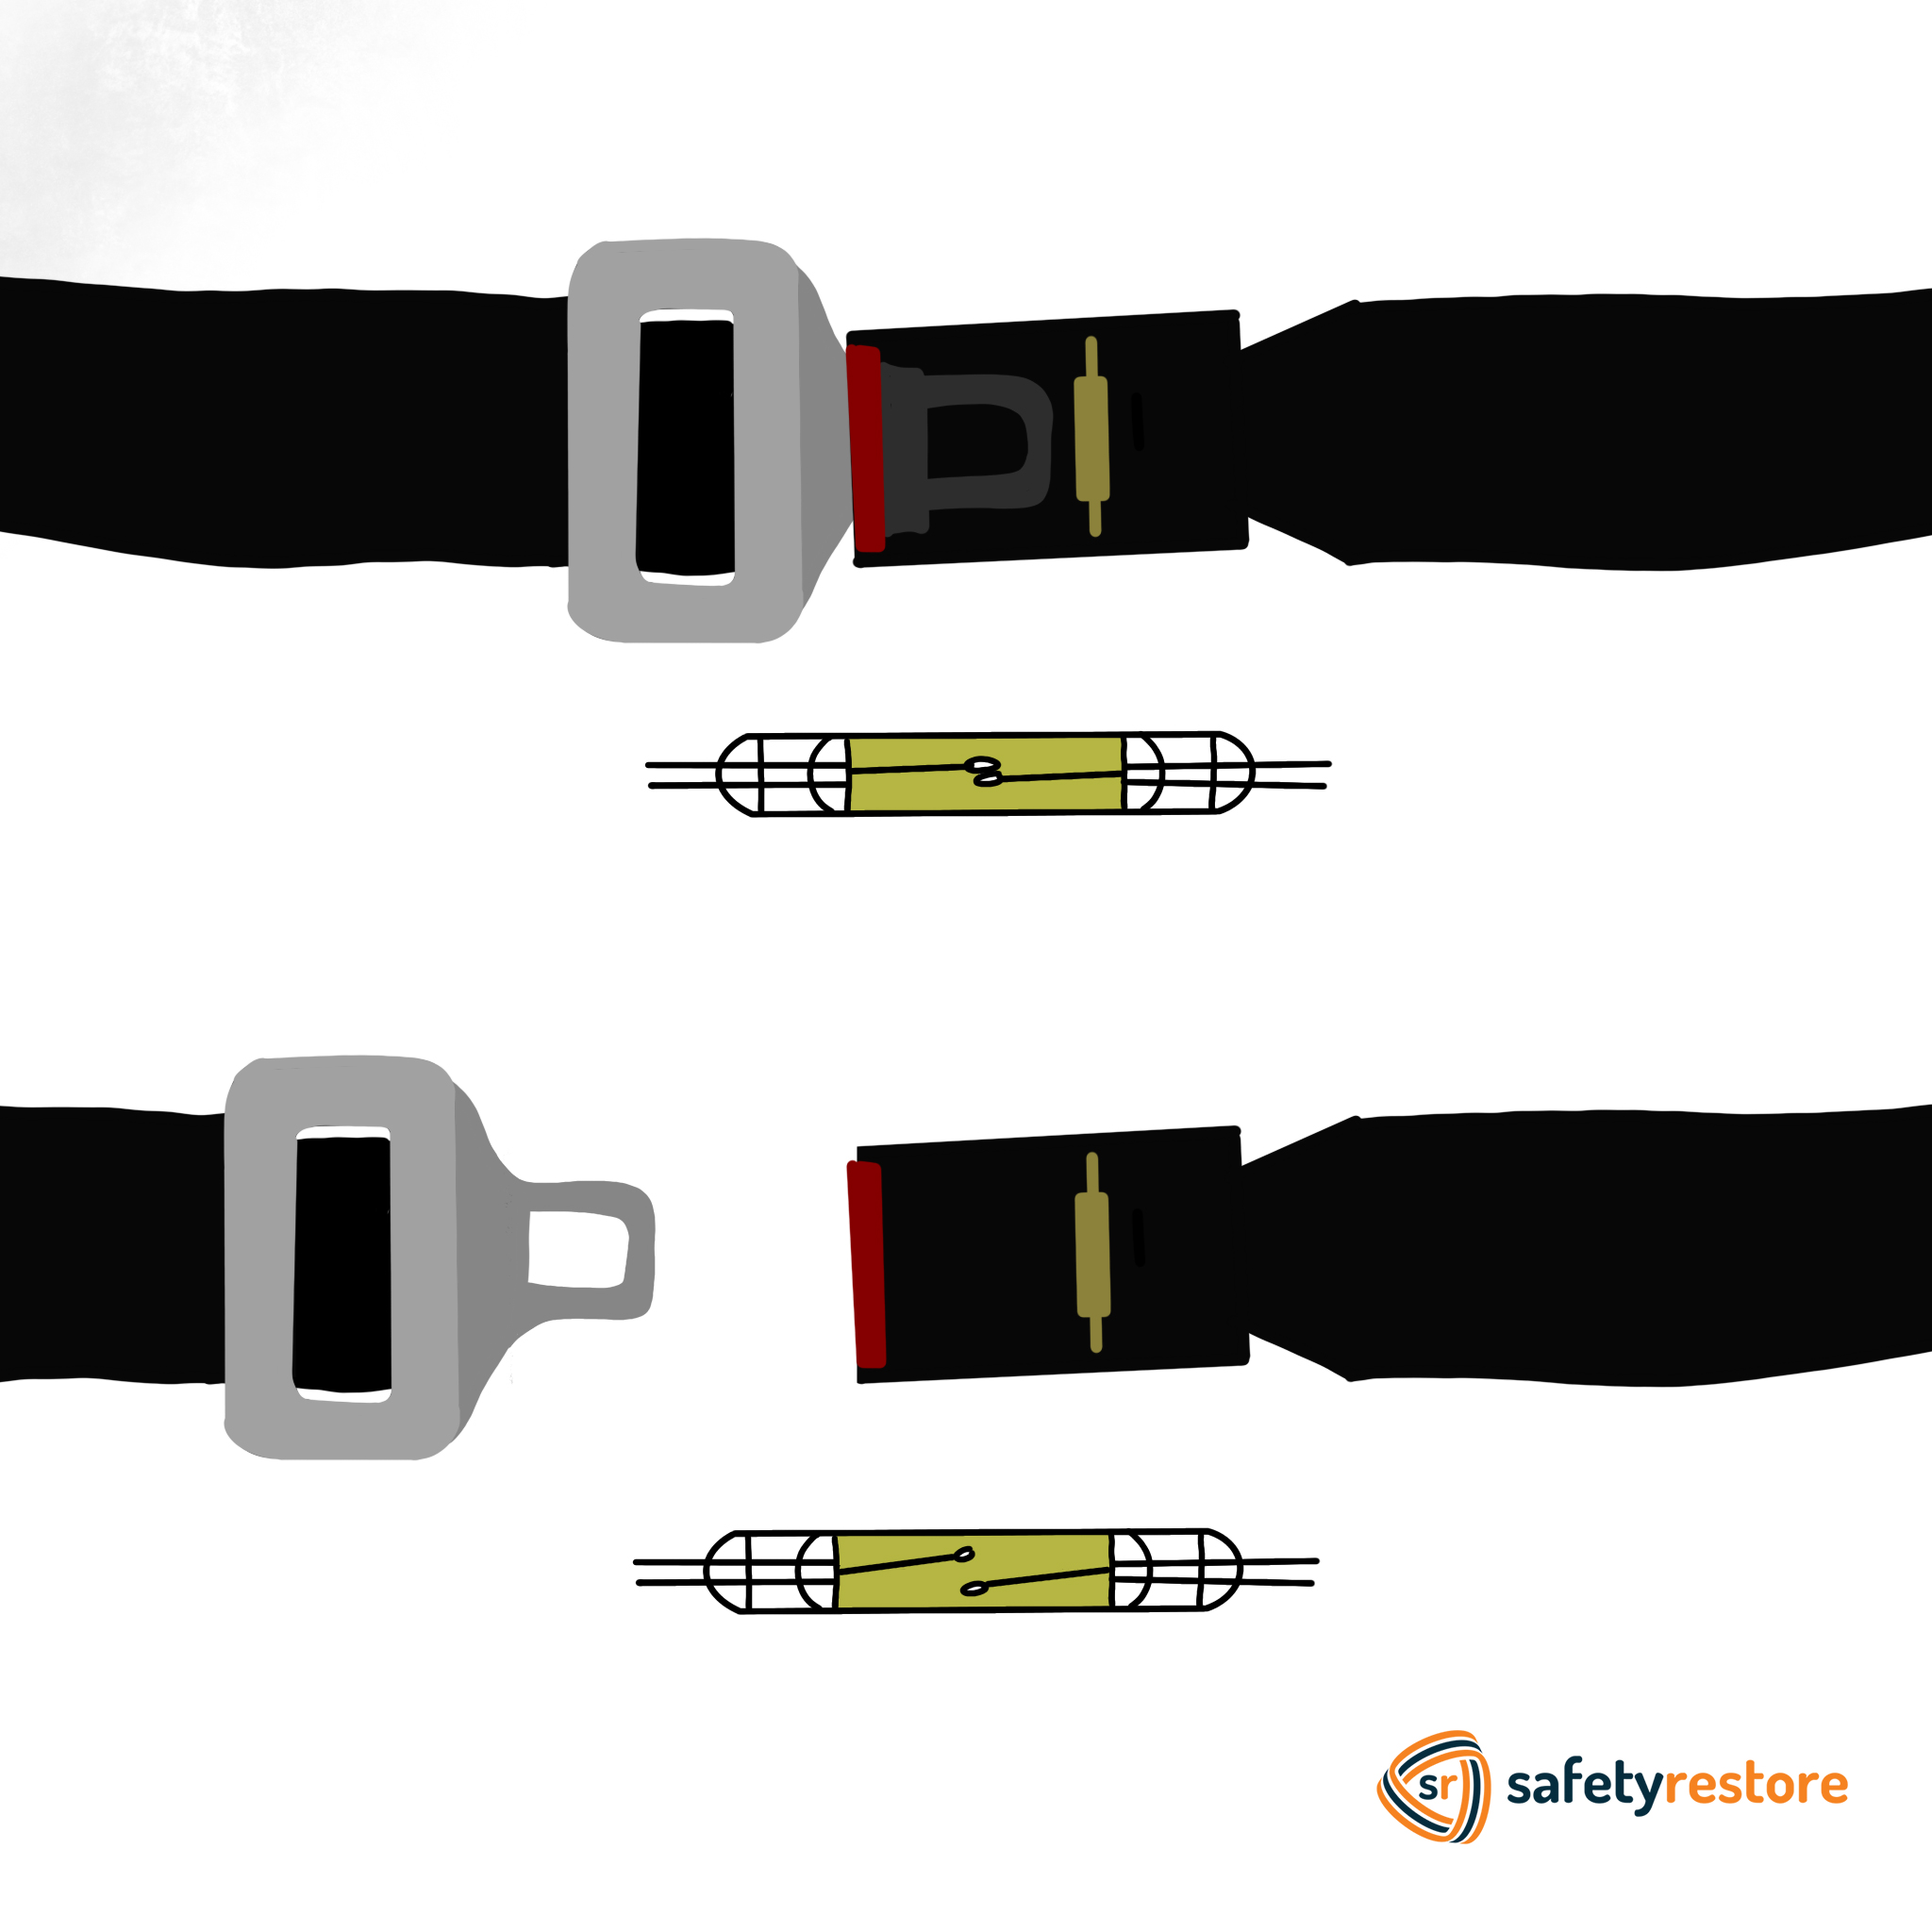 How Do Seat Belts Work?